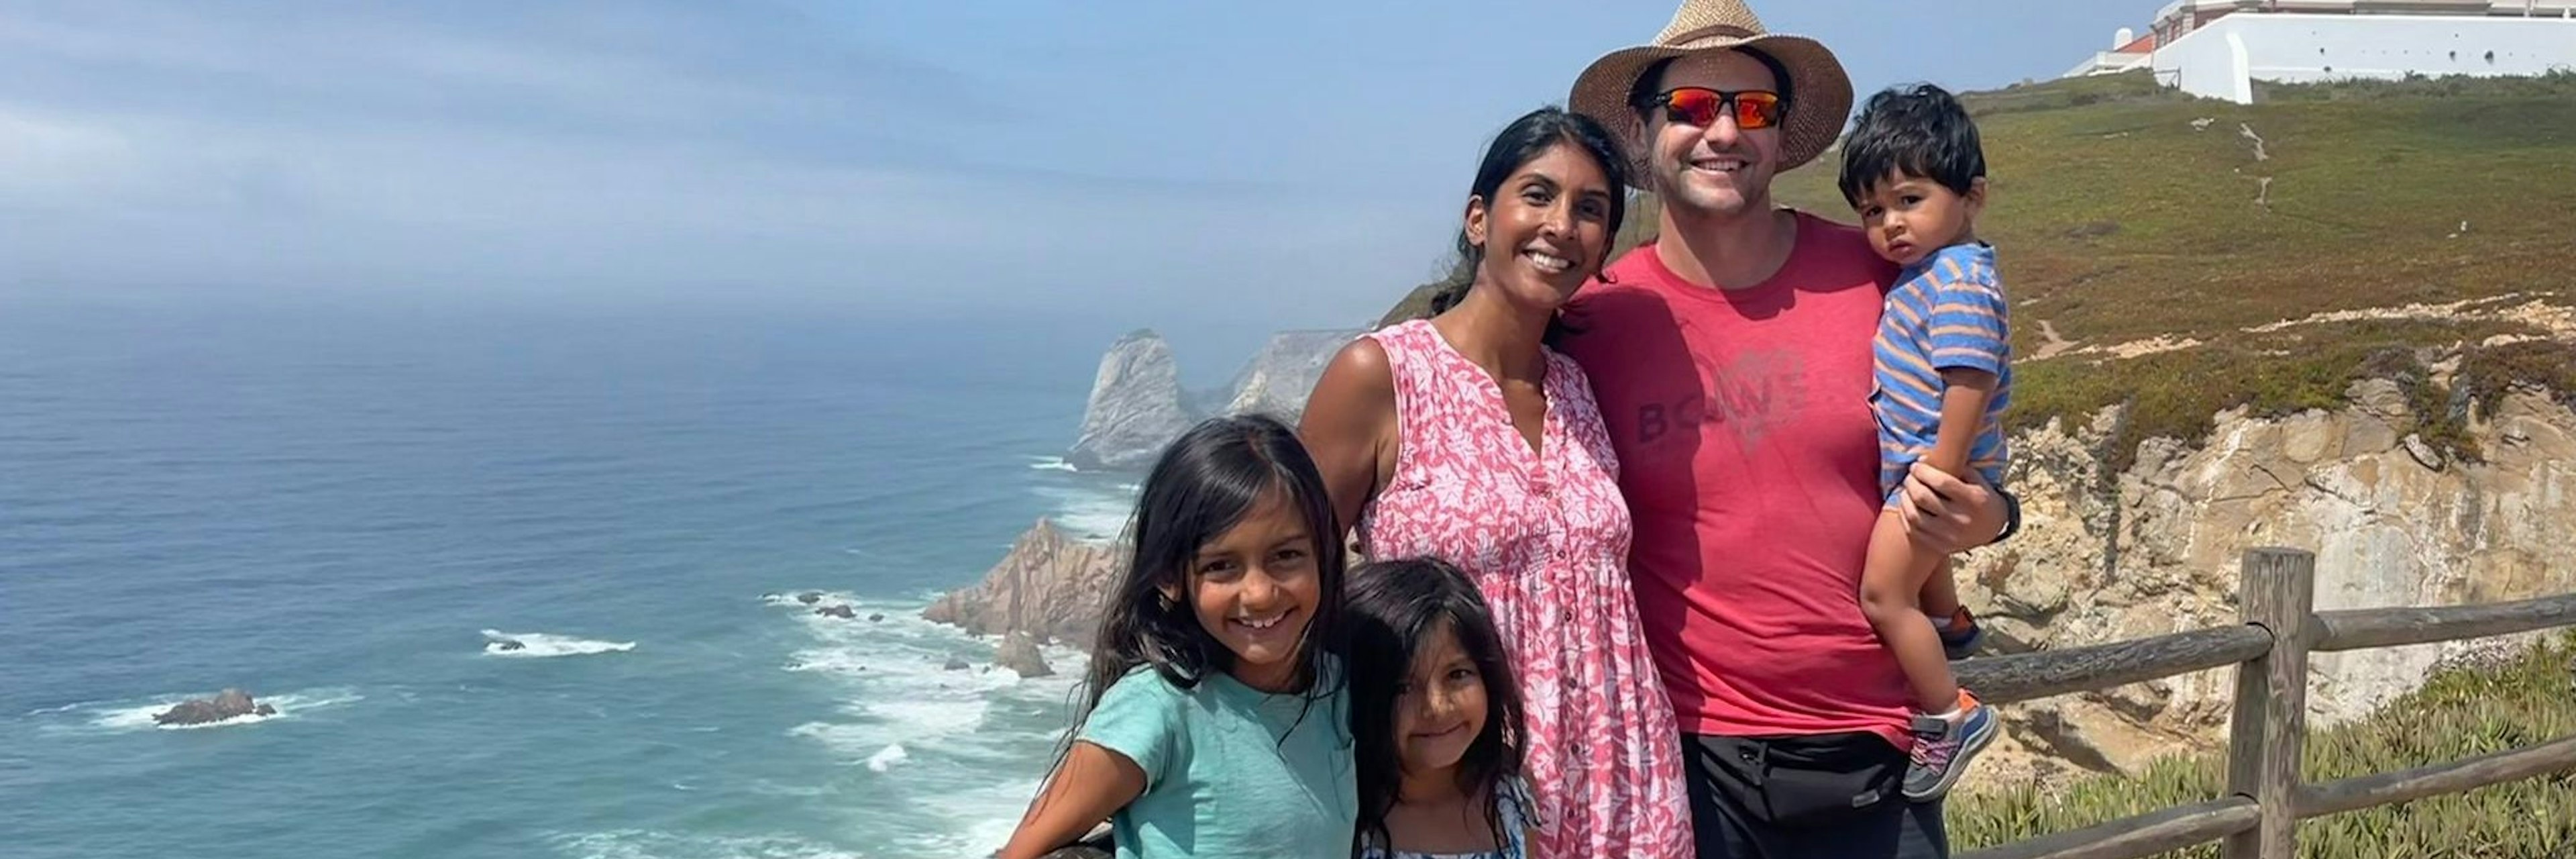 An image of entrepreneur Nick Taranto and his wife Nimmi Roche, a digital nomad family who recently took their children on a workation in Portugal